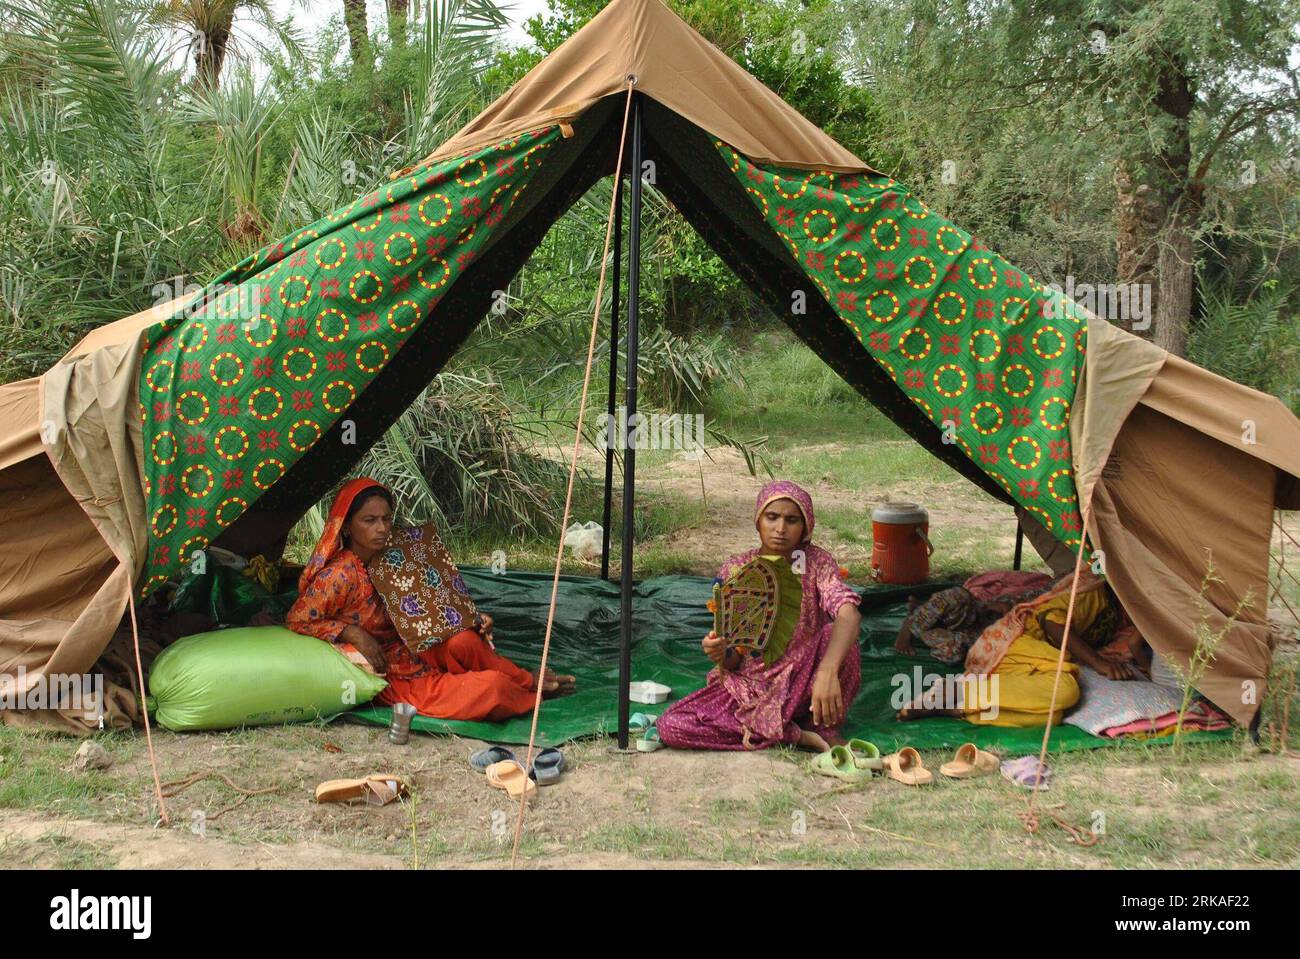 Bildnummer: 54342395  Datum: 24.08.2010  Copyright: imago/Xinhua (100824) -- DADAR, Aug. 24, 2010 (Xinhua) -- Pakistani women take rest at a camp set up for the displaced in flood-affected southwest Pakistan s Dadar on Aug. 24, 2010. The floods have killed over 1,500 and affected up to 20 million nationwide in Pakistan s worst natural disaster, with the threat of disease ever present in the camps sheltering survivors. (Xinhua/Iqbal Hussain)(zl) PAKISTAN-FLOOD PUBLICATIONxNOTxINxCHN Gesellschaft Naturkatastrophe Hochwasser Flut Pakistan Indus kbdig xcb 2010 quer premiumd xint o0 Zelt Flutopfer Stock Photo